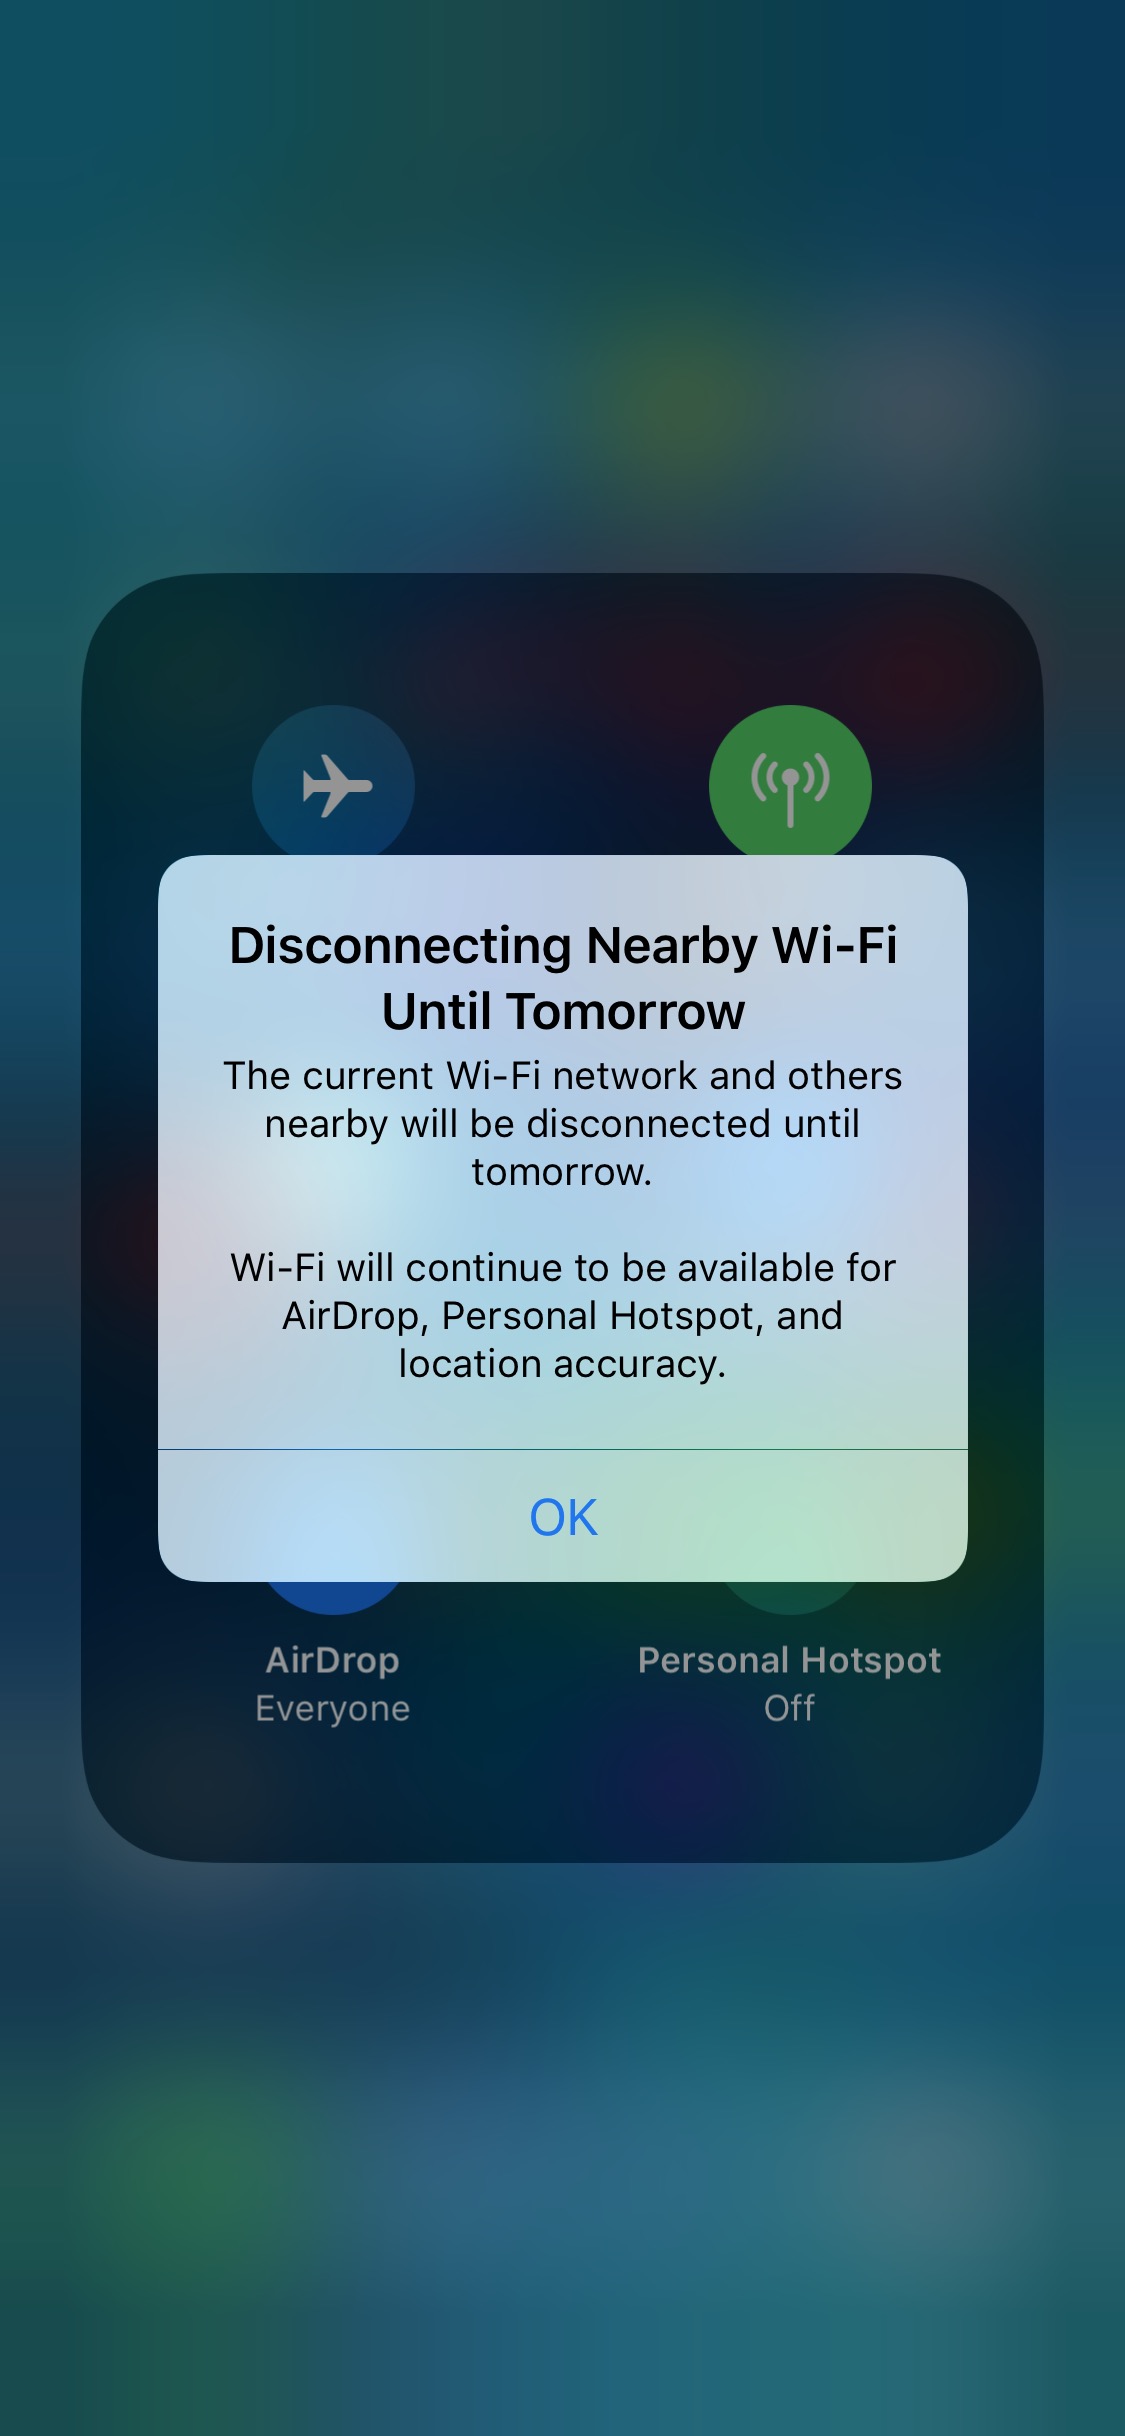 iOS 11.2 Beta 3 Alerts Users to Change in How Control Center's Wi-Fi and Bluetooth Toggles Work